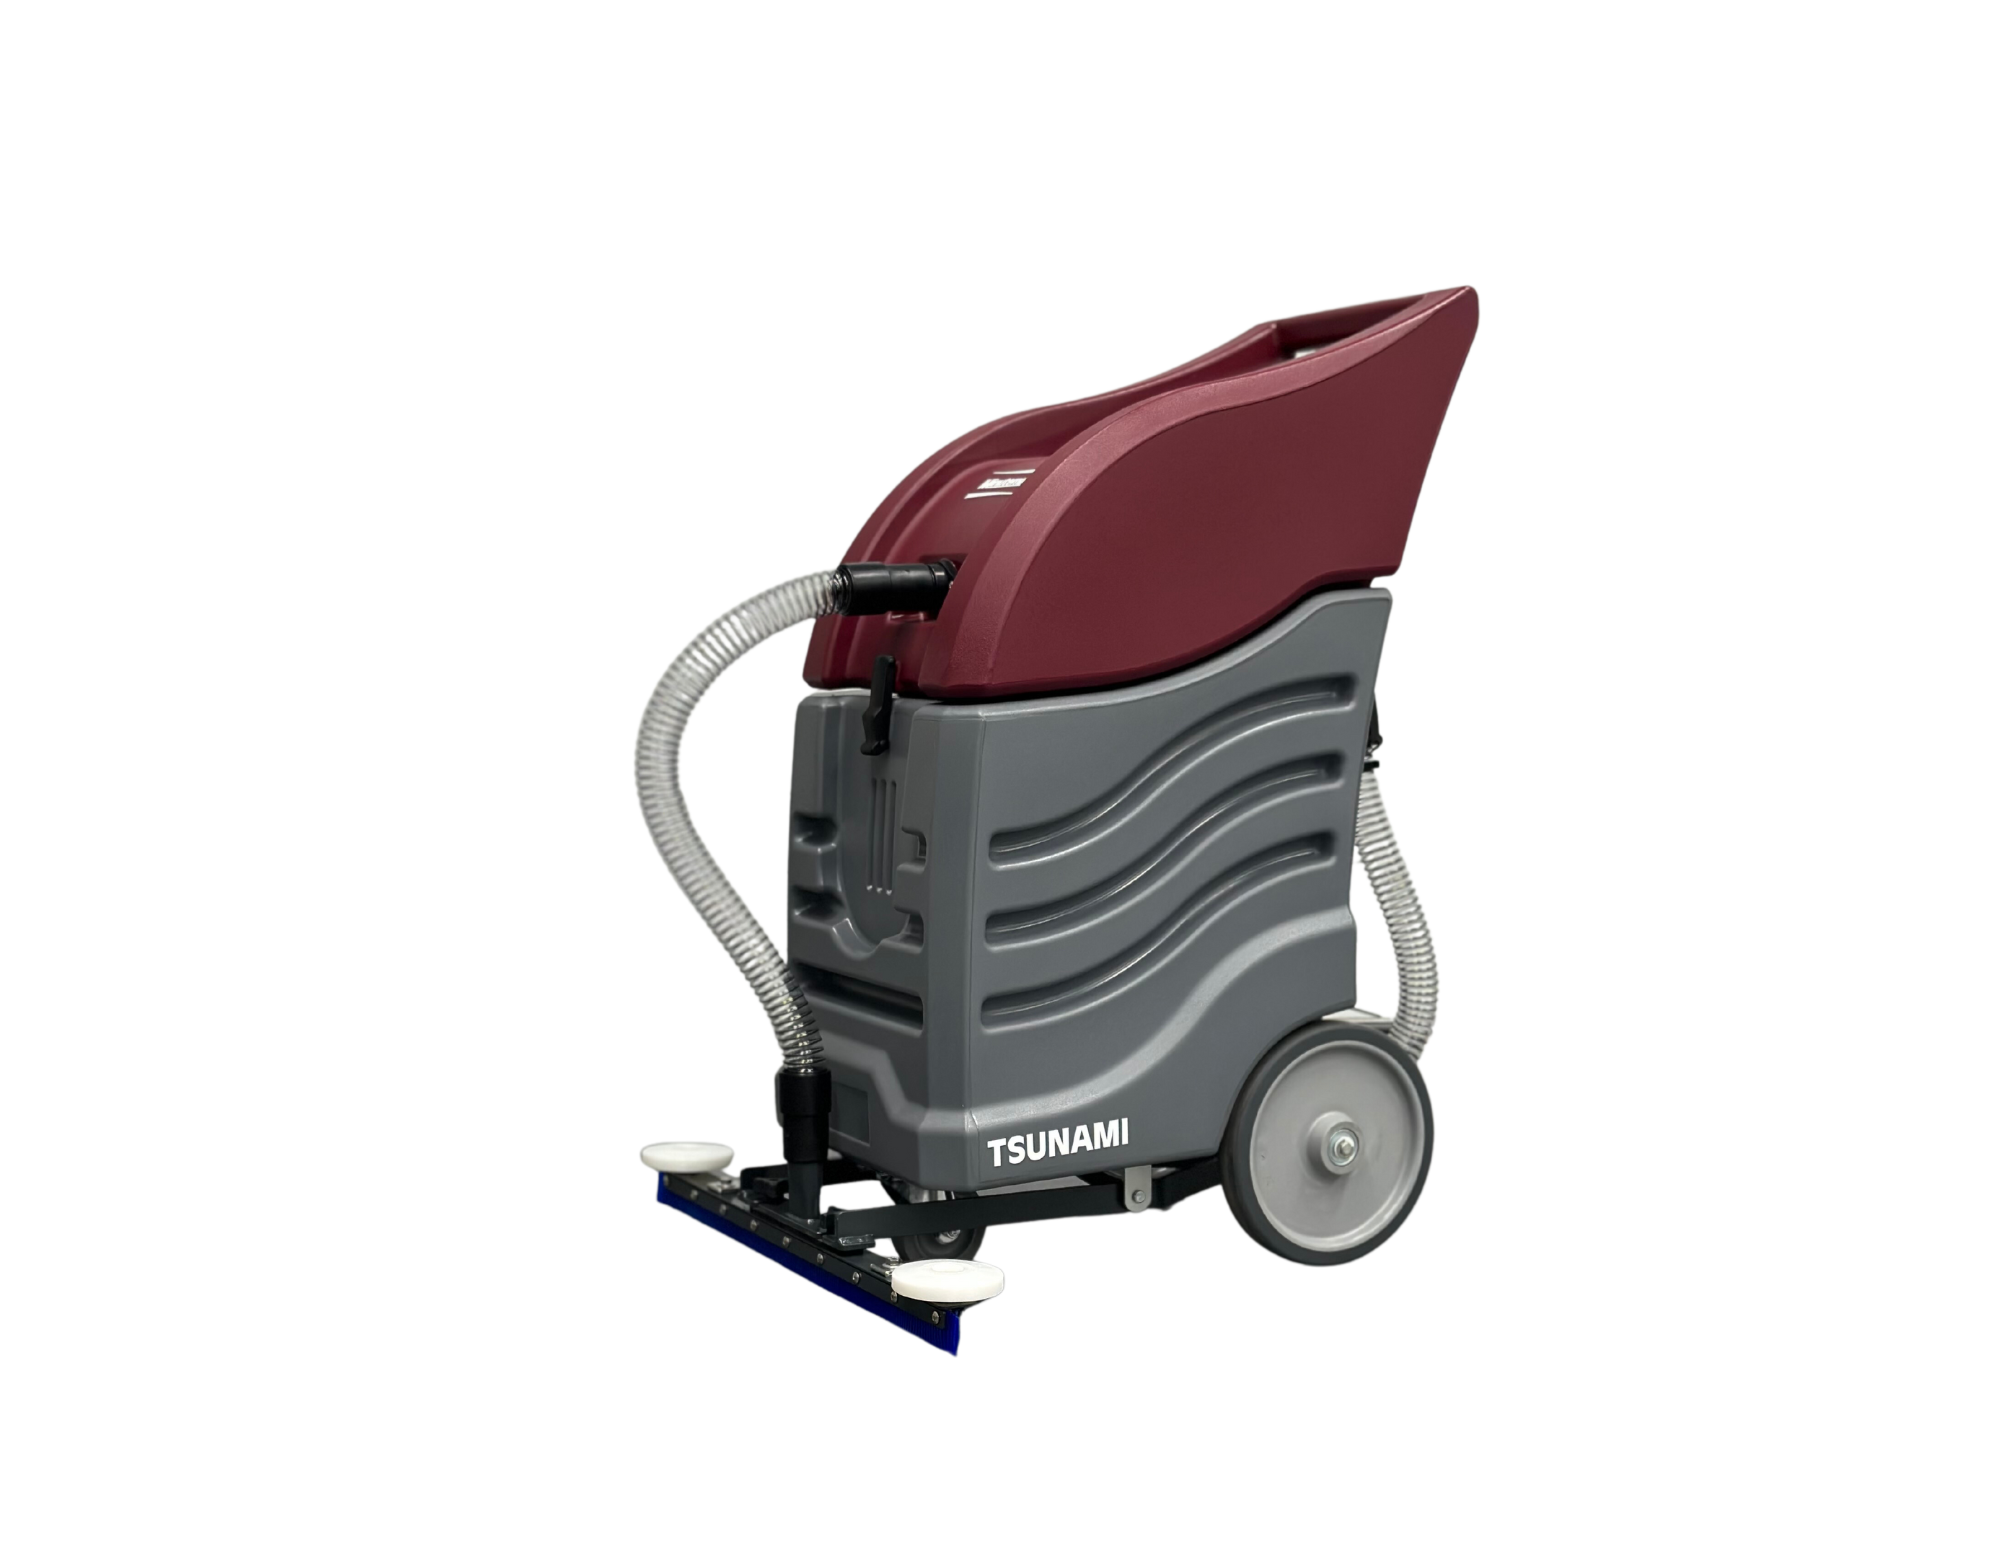 Minuteman Tsunami, Wet Dry Vacuum, Shop Vac, 16 Gallon, 125CFM, 1.3HP Motor, Front Mount Squeegee Only